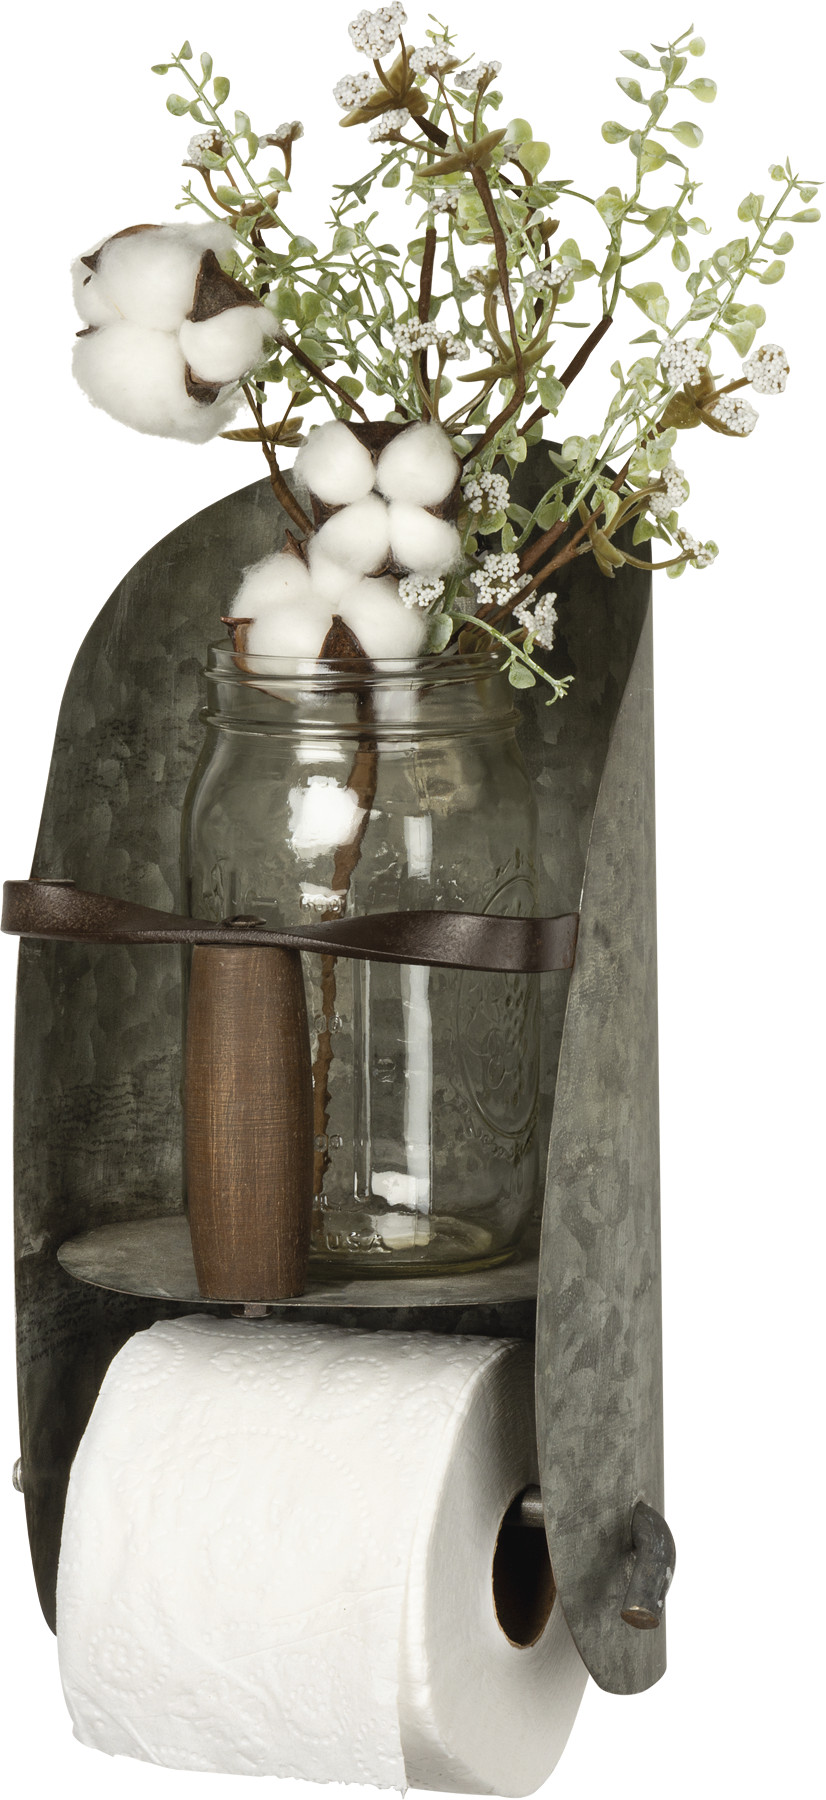 Toilet Paper Holder With Shelf, Rustic Distressed, Farmhouse